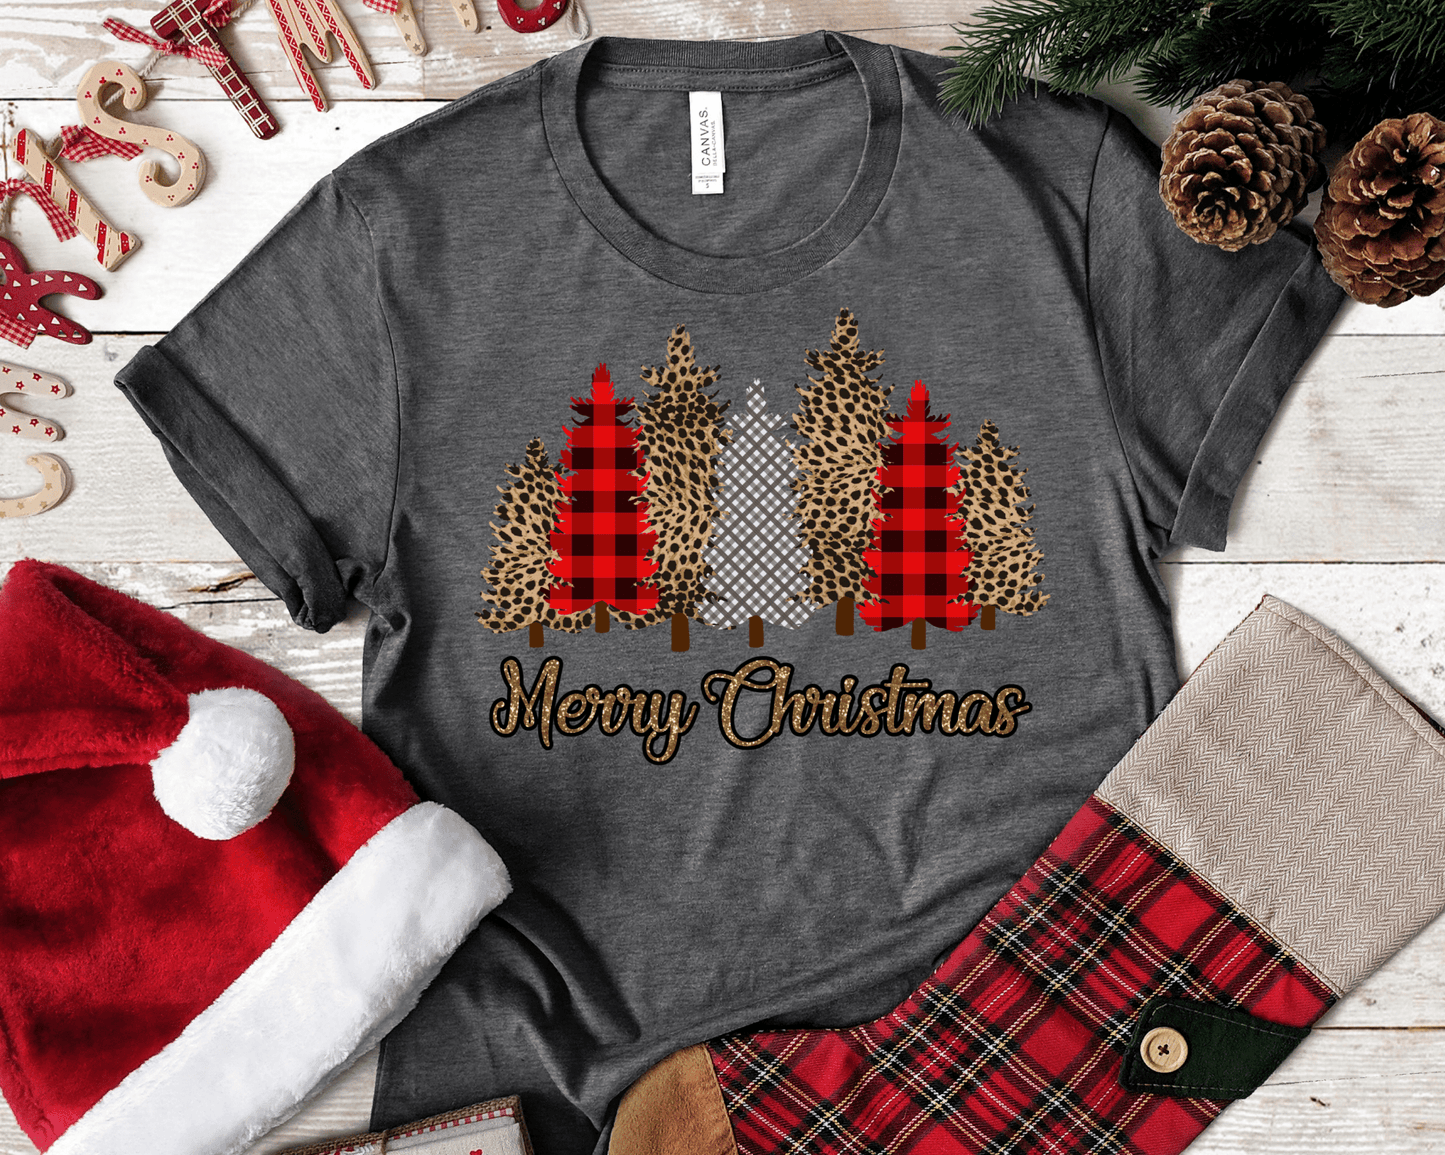 Merry Christmas trees leopard buffalo plaid pattern DTF TRANSFERPRINT TO ORDER - Do it yourself Transfers